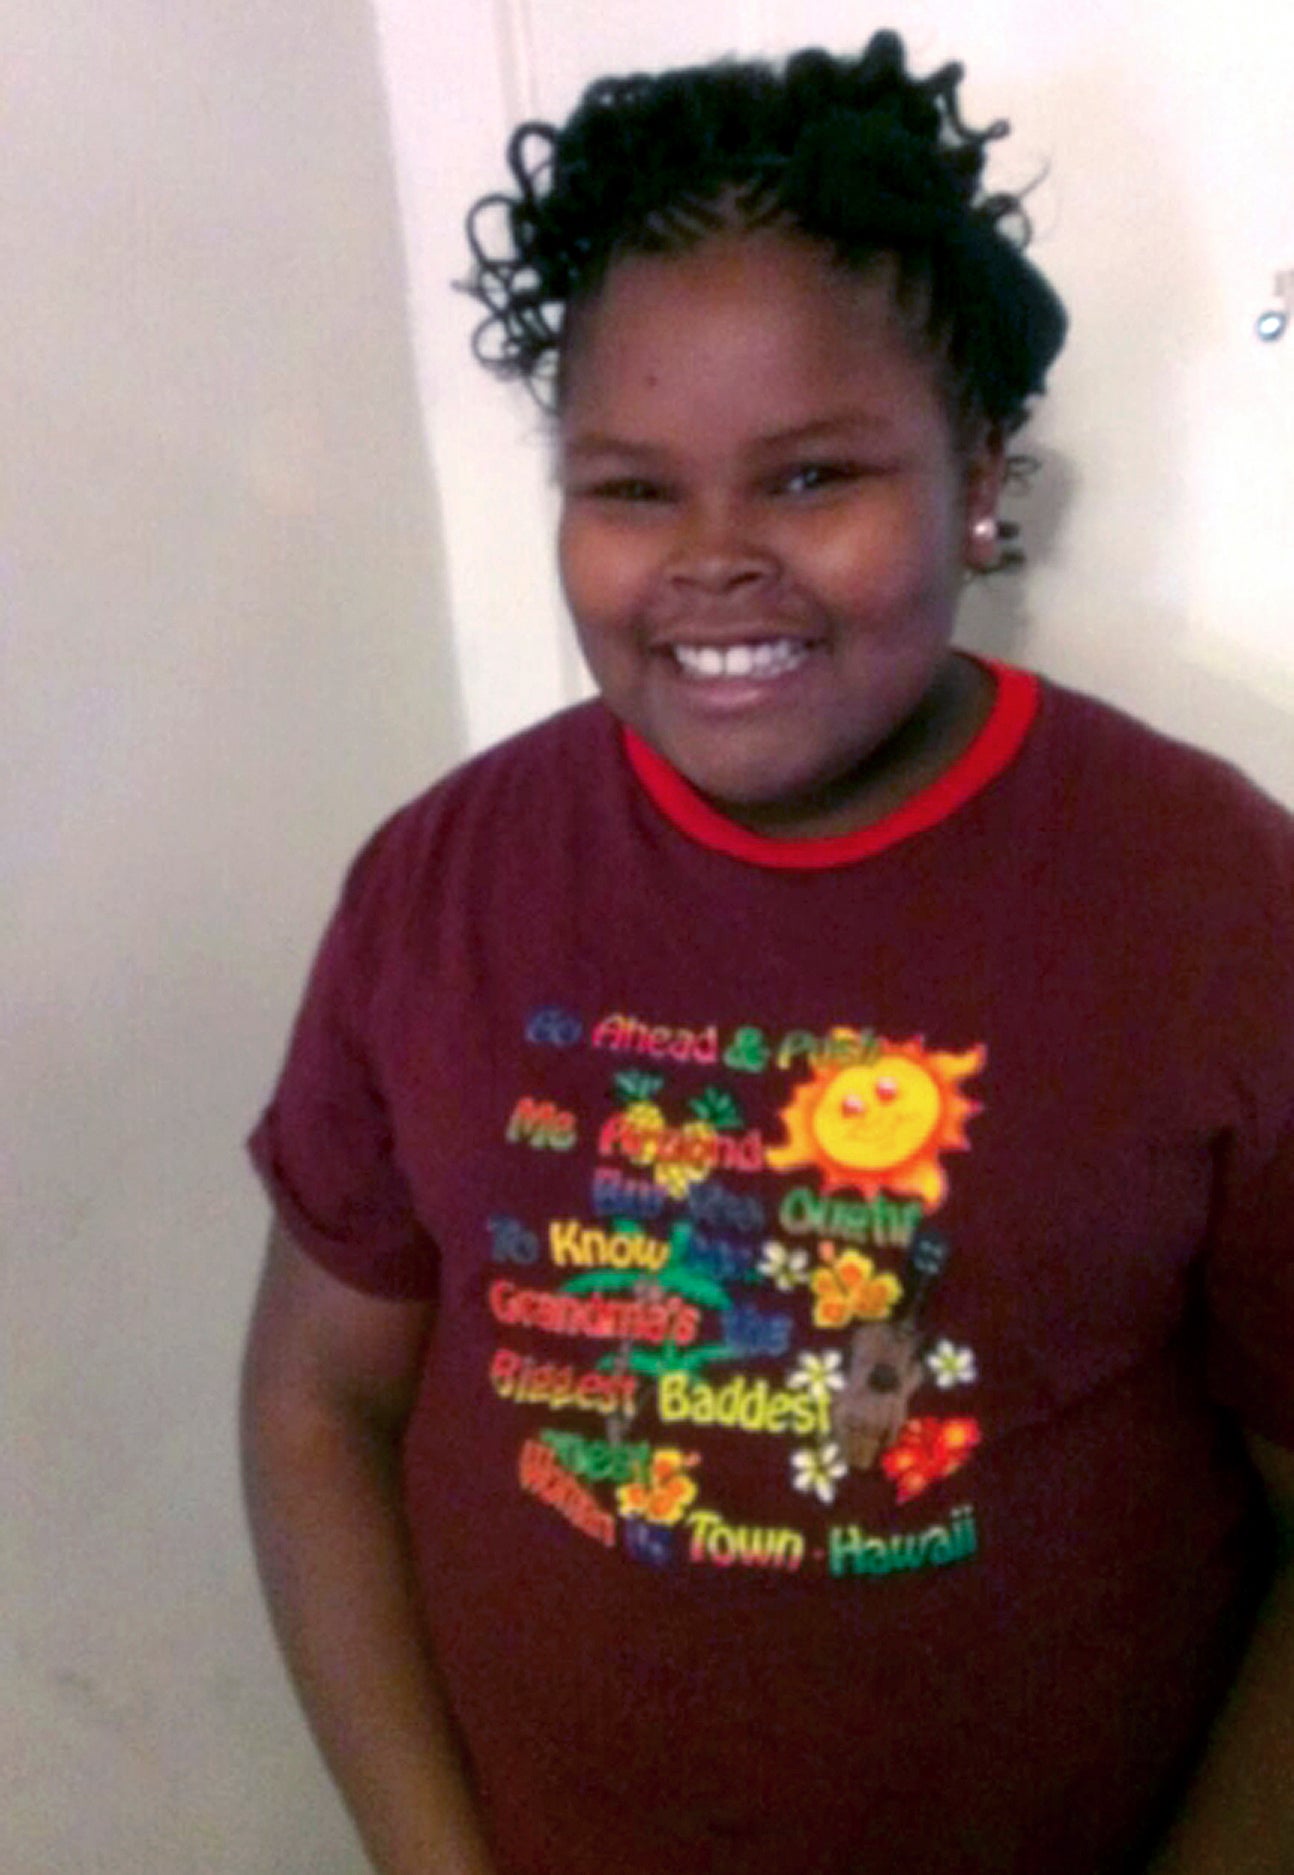 Lessons from Jahi McMath